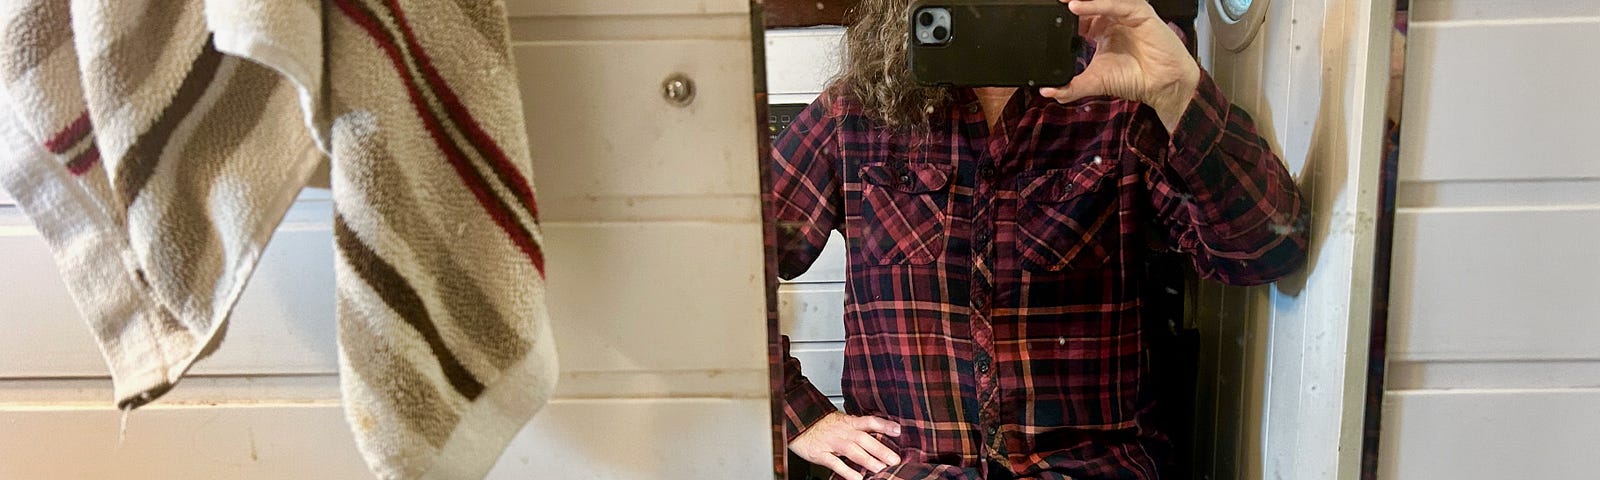 A woman sits on a toilet seat in a tiny bathroom. A mirror is in front of her as she takes a photo of herself. She has long grey hair and wears jeans and a plaid shirt.